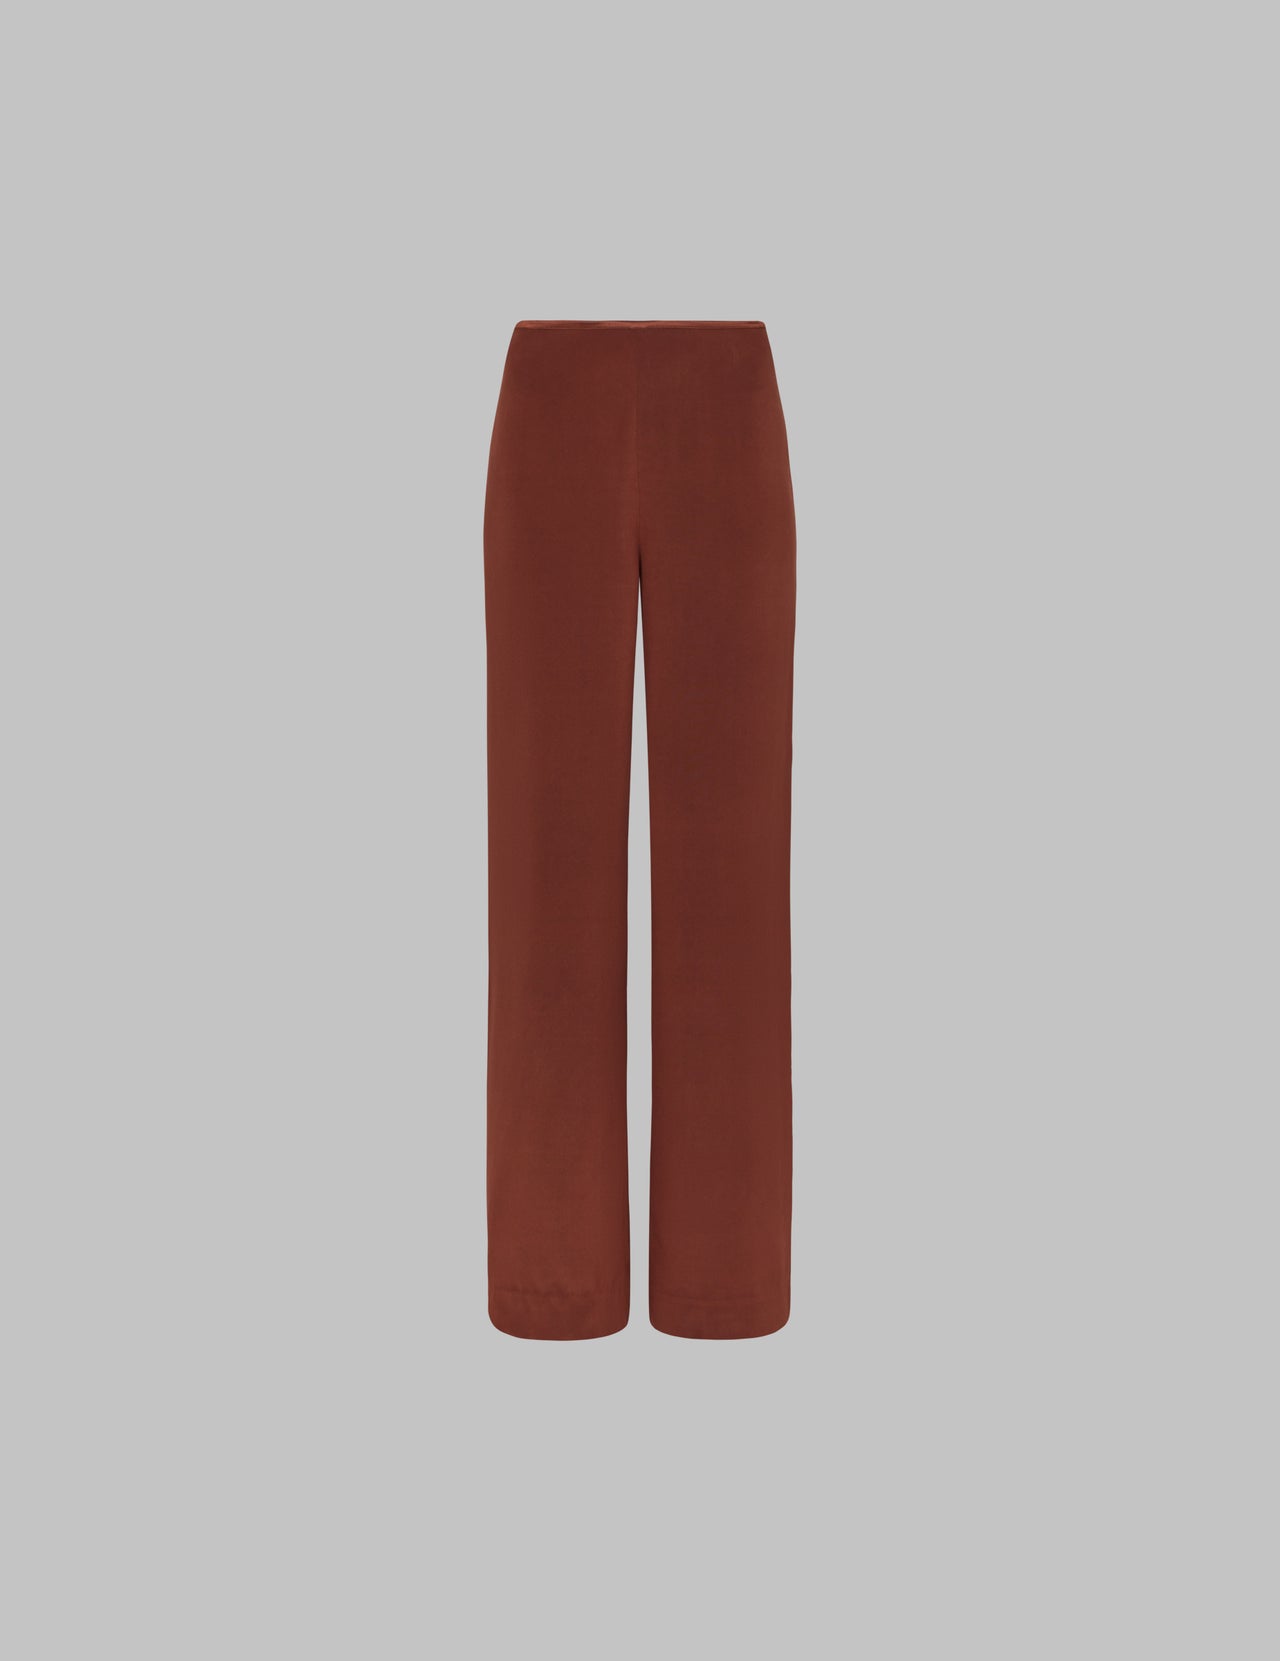  Russet Brown Silk Crepe Nadia Trouser With Thin Waistband  